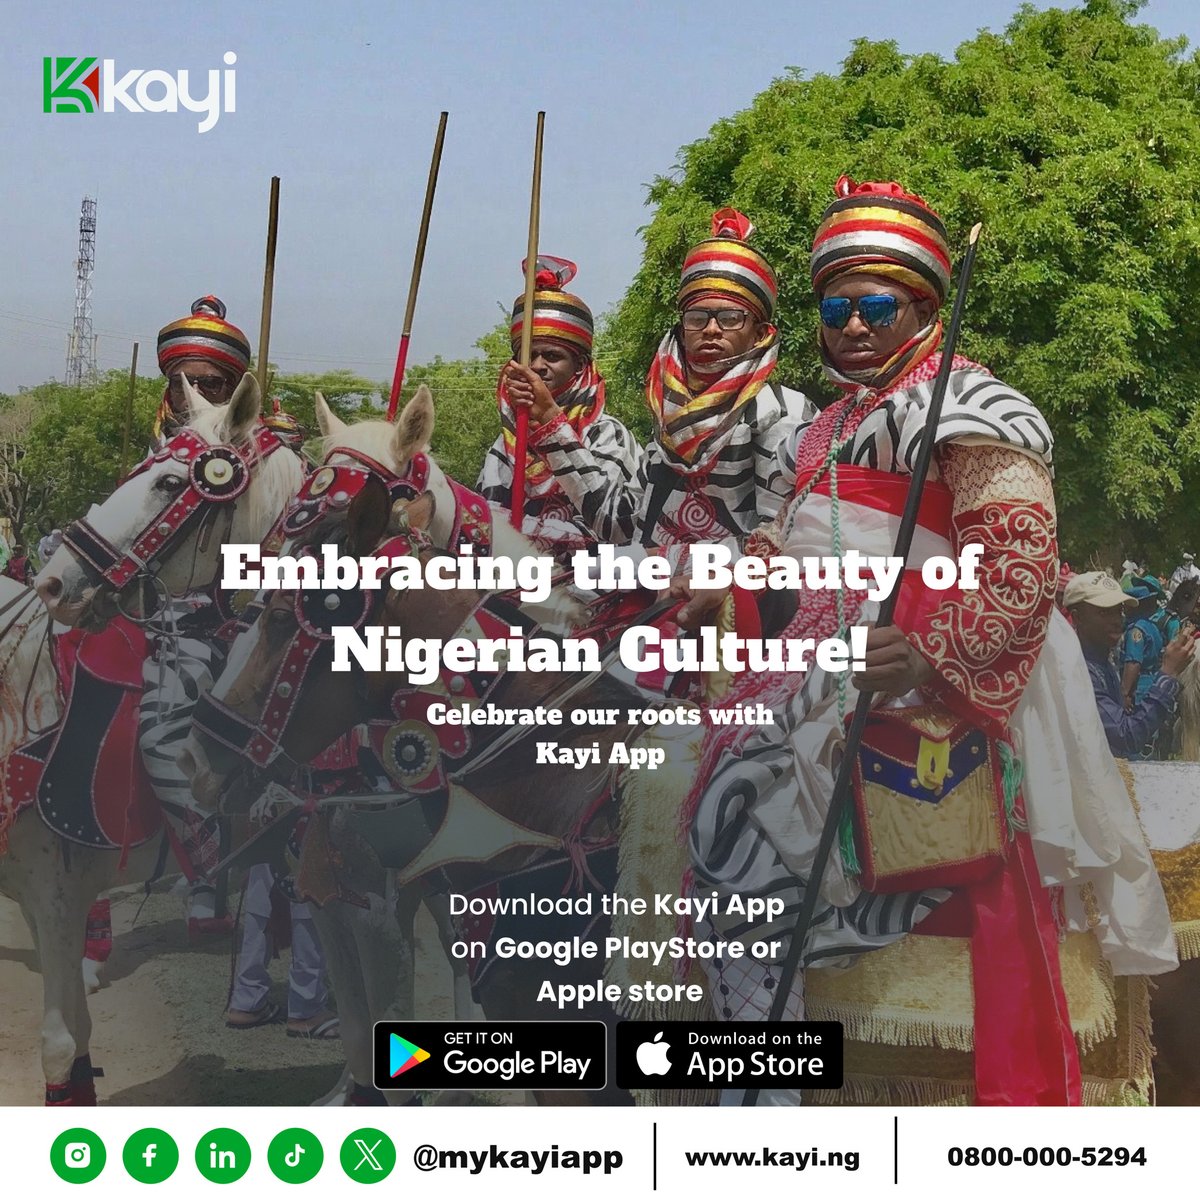 Experience the power of connection with KayiApp! Regardless of culture or tradition, join the movement today to embrace our rich cultural heritage. Download MyKayiApp now on Google Store or Apple Store.

#MyKayiApp #NowLive #DownloadNow #Bankingwithoutlimits #downloadmykayiapp